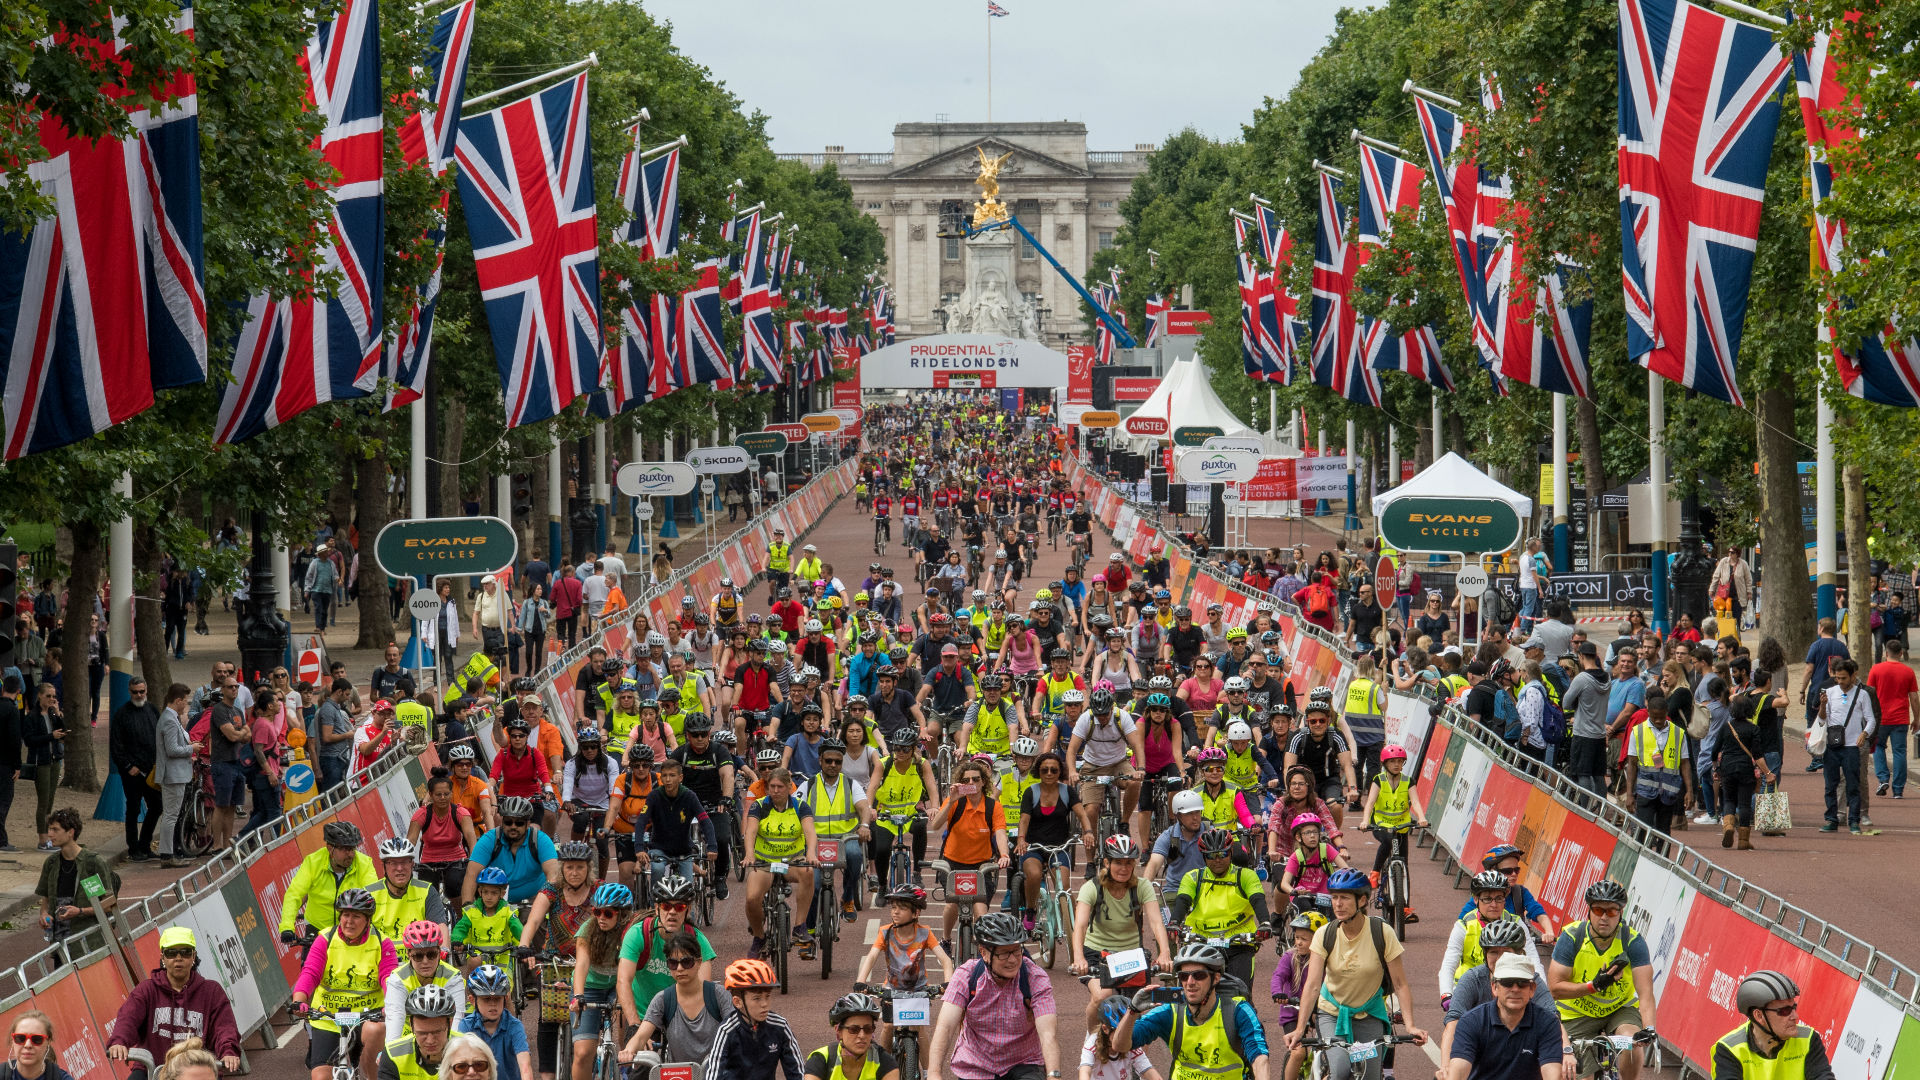 Riders in the Prudential RideLondon FreeCycle finish on The Mall. Image courtesy of Prudential RideLondon